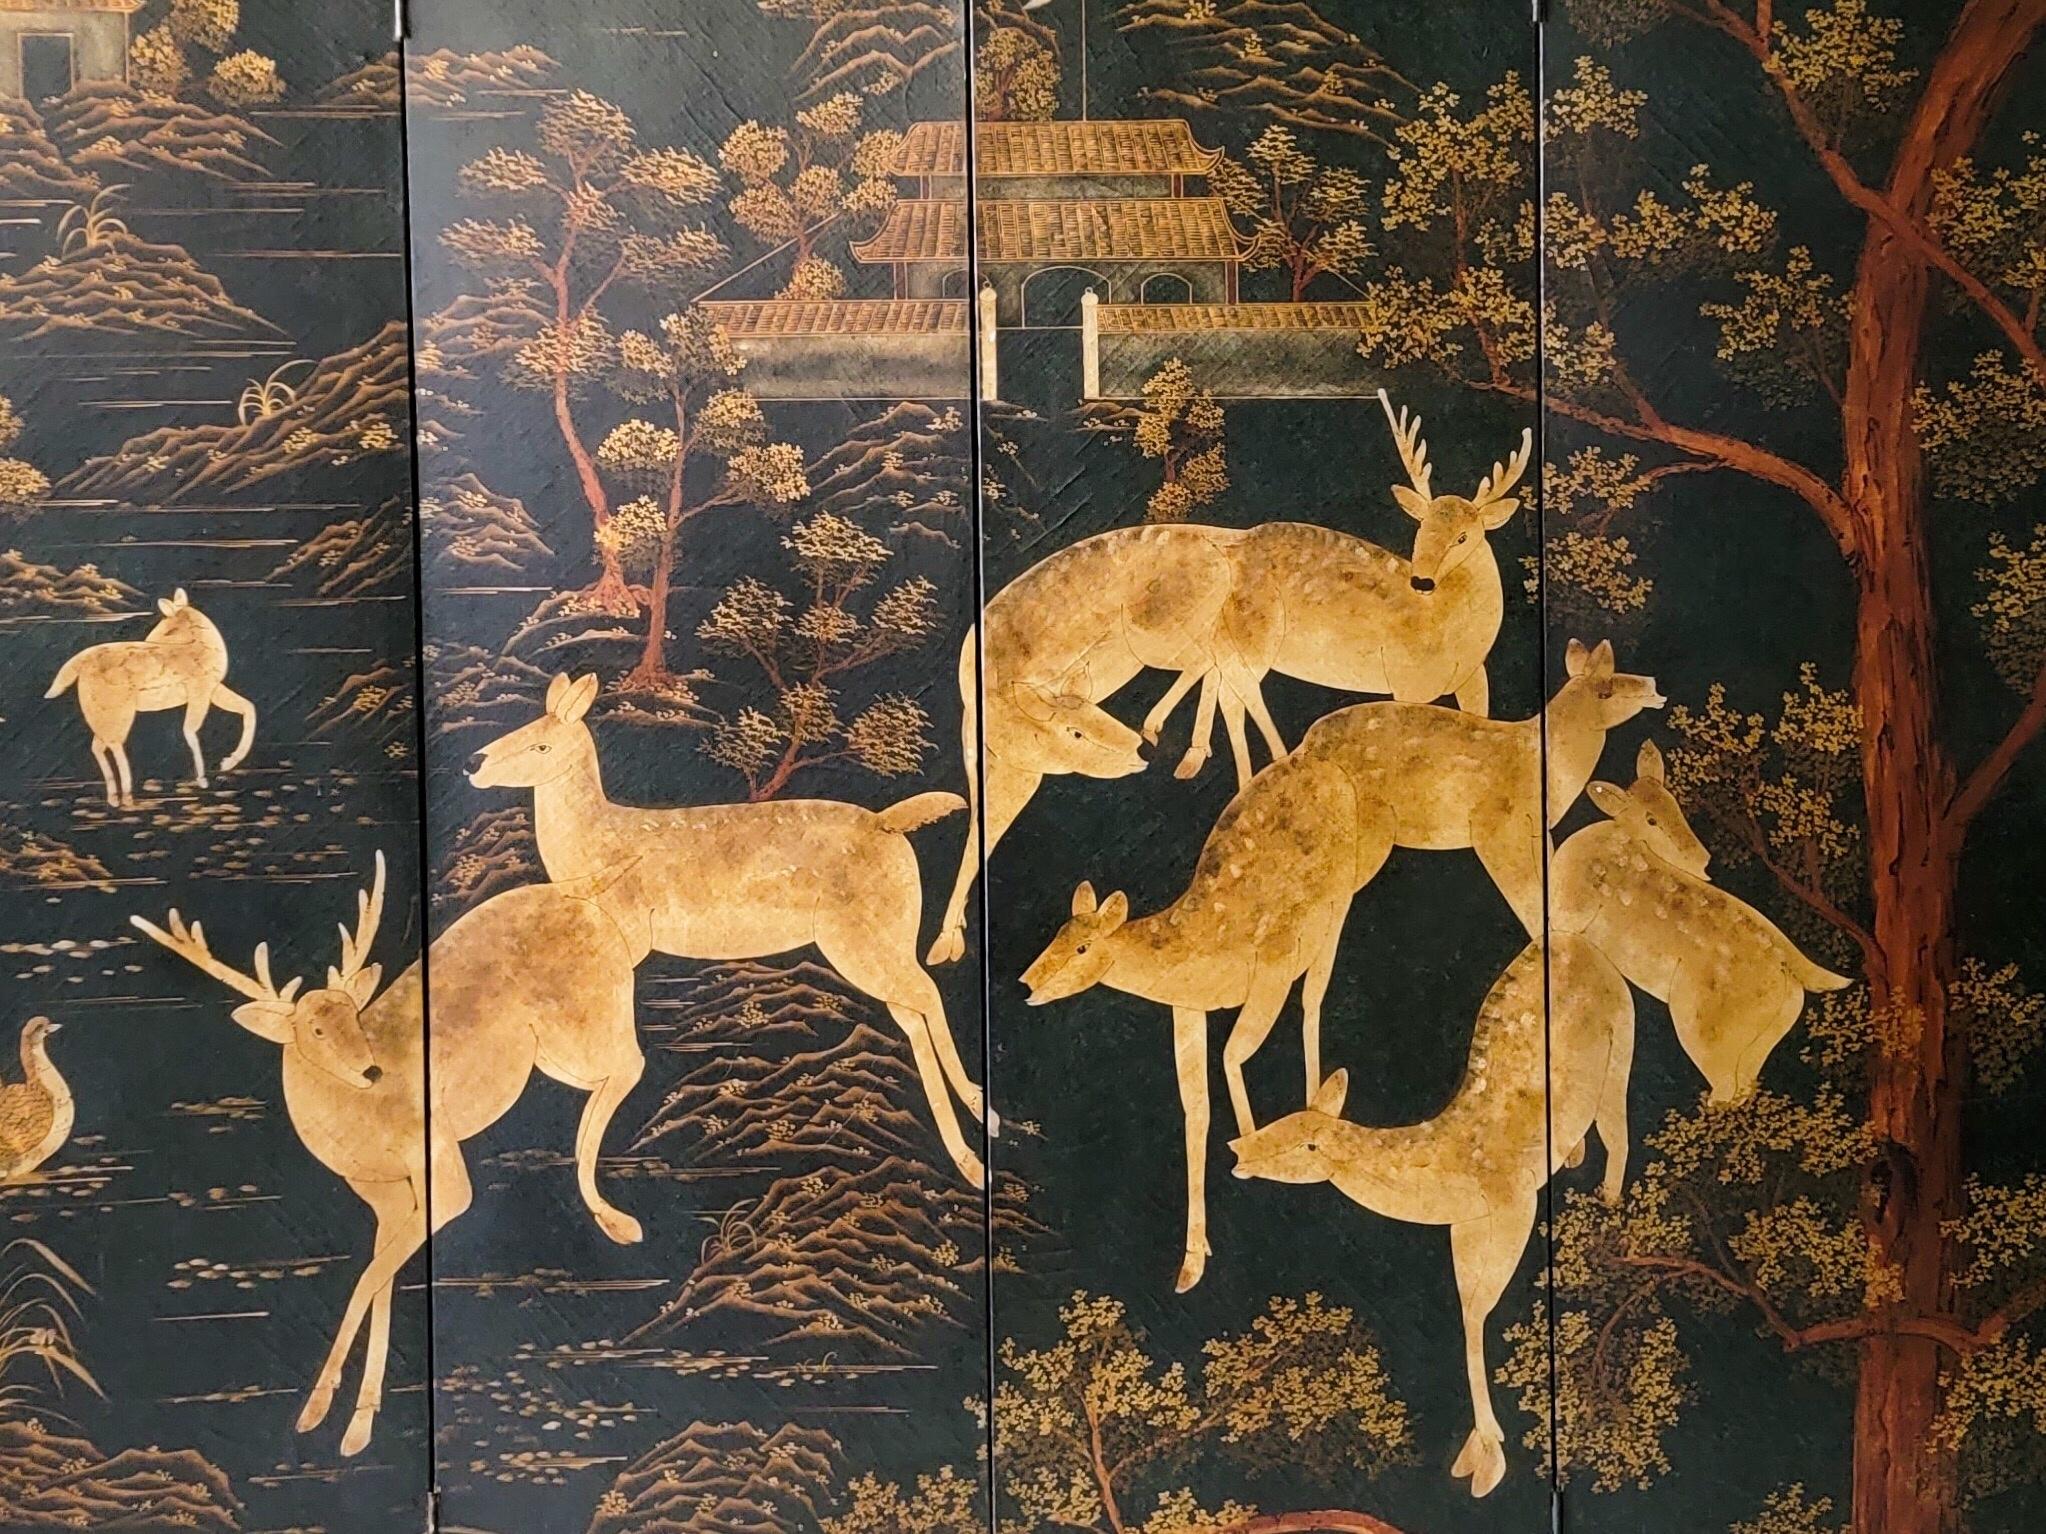 This is a late 20th century large 4 panel chinoiserie folding screen with unusual forrest and deer pagoda motif. It is lined with nailheads, and appears to be a wallpaper applied to board.